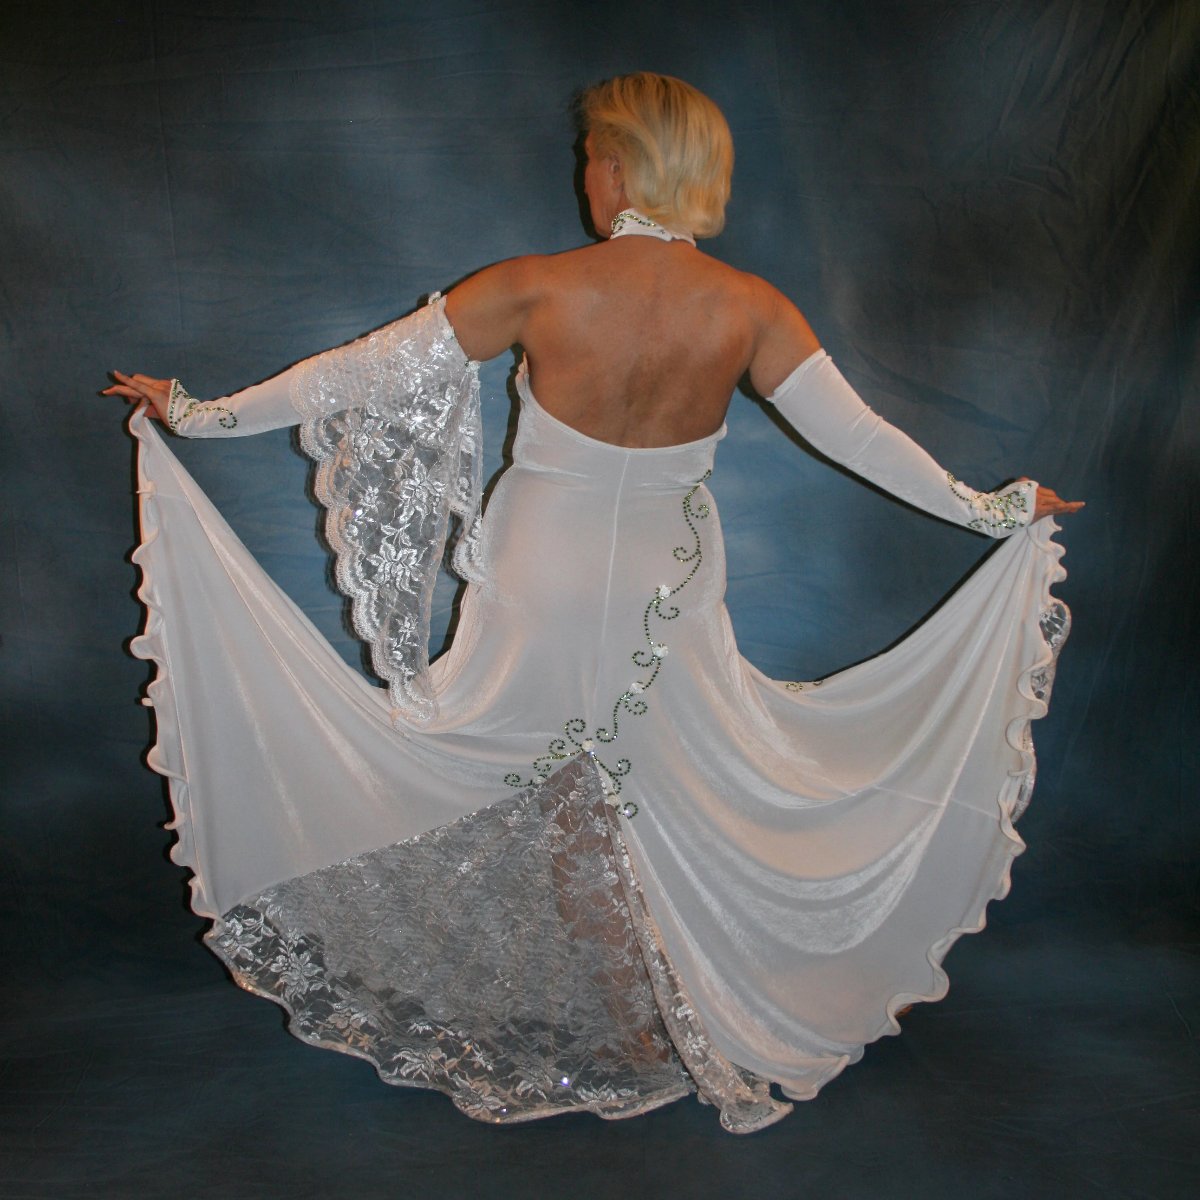 Crystal's Creations back view of white ballroom dress created of luxurious white stretch velvet with sequined lace insets & accents